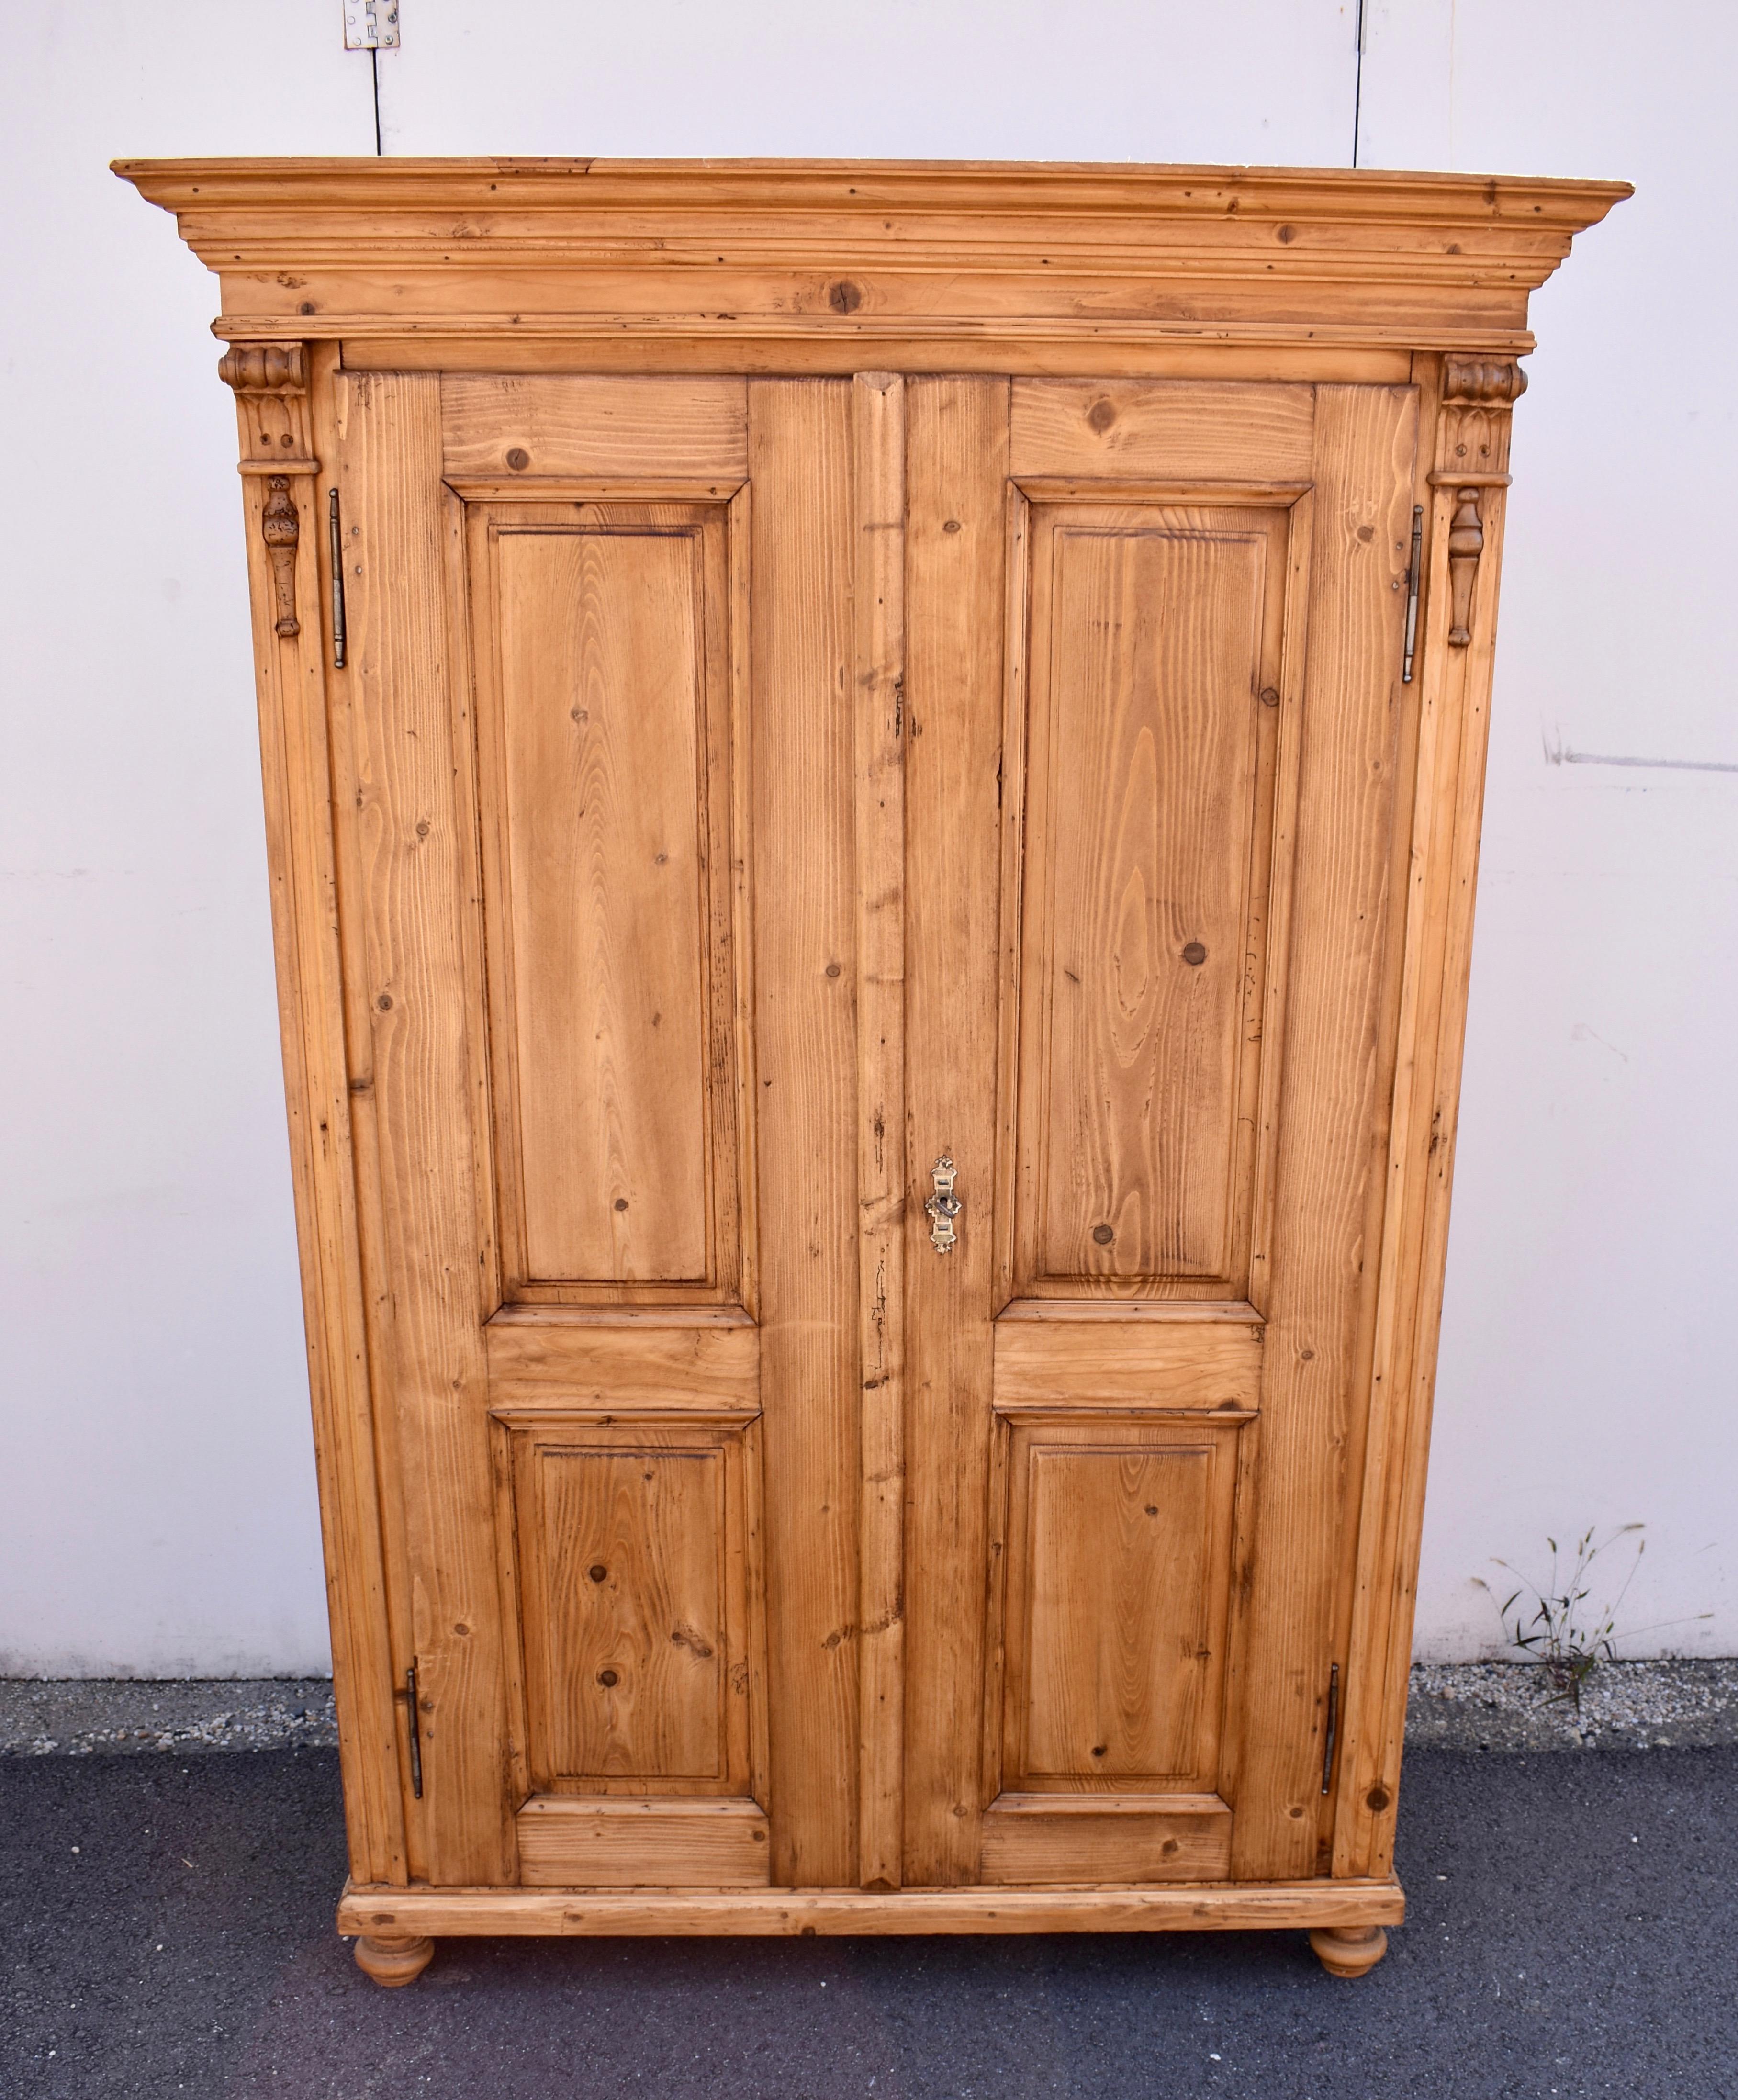 The wide crown of this handsome piece is built up with three tiers of molding including an attractive strip of reeding.  The two overlay doors each house two raised panels, one tall above one shorter.  The doors open on iron French style fiche